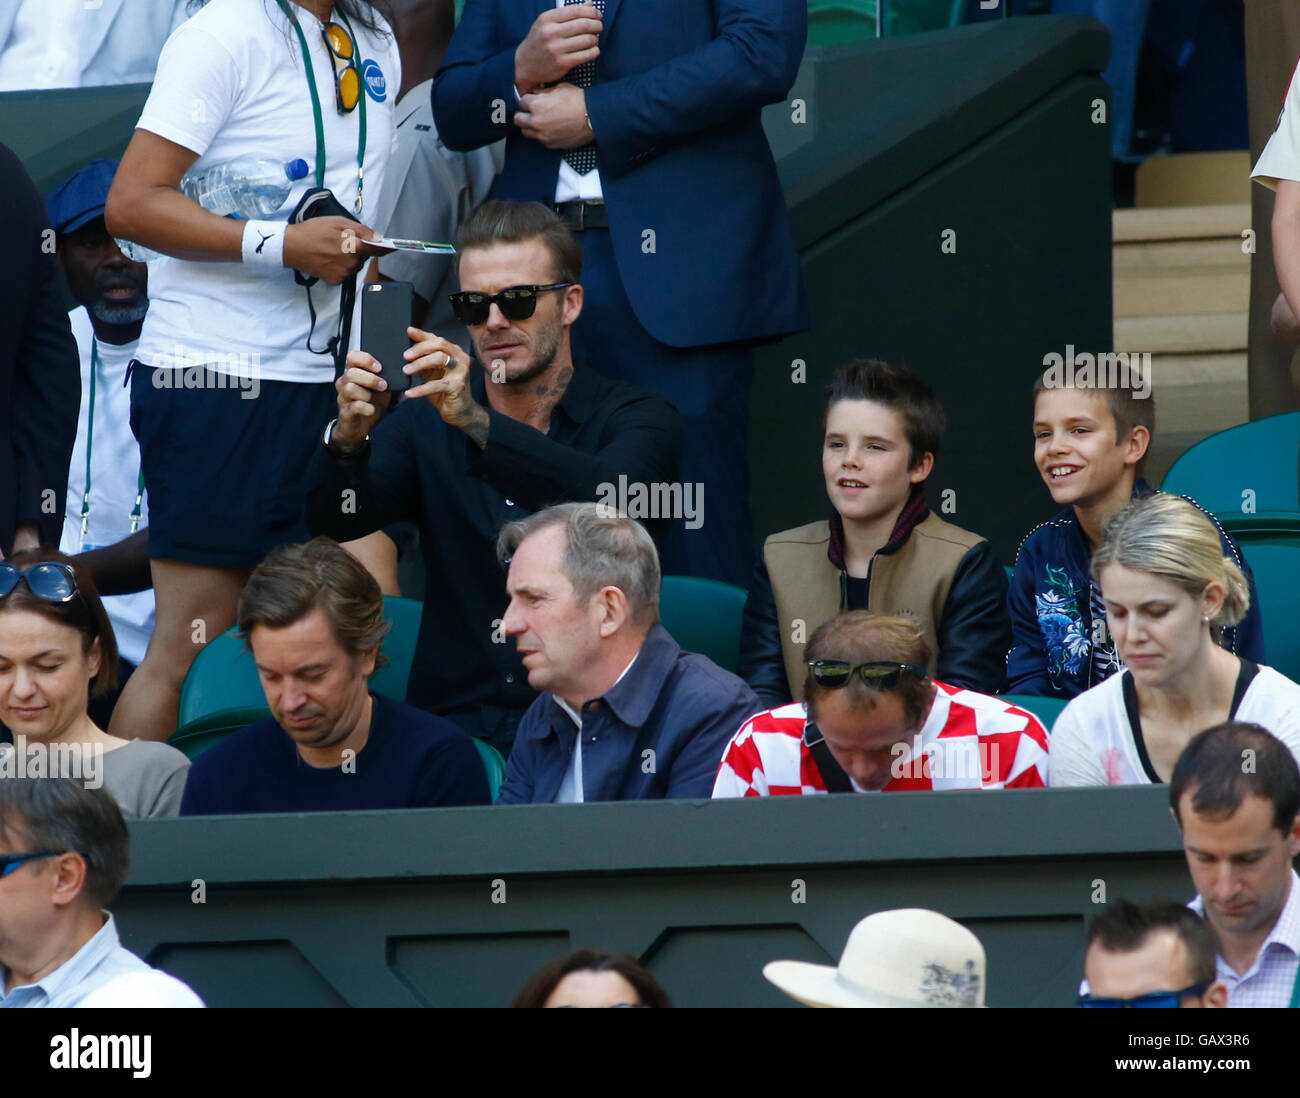 London, UK. 6th July, 2016. All England Lawn Tennis and Croquet Club, London, England. The Wimbledon Tennis Championships Day 10.  David Beckham with his sons Romeo and Cruz in the players' box on Centre Court before today's quarter final between number 3 seed, Roger Federer (SUI) and number 9 seed, Marin Cilic (CRO). © Action Plus Sports Images/Alamy Live News Credit:  Action Plus Sports Images/Alamy Live News Stock Photo